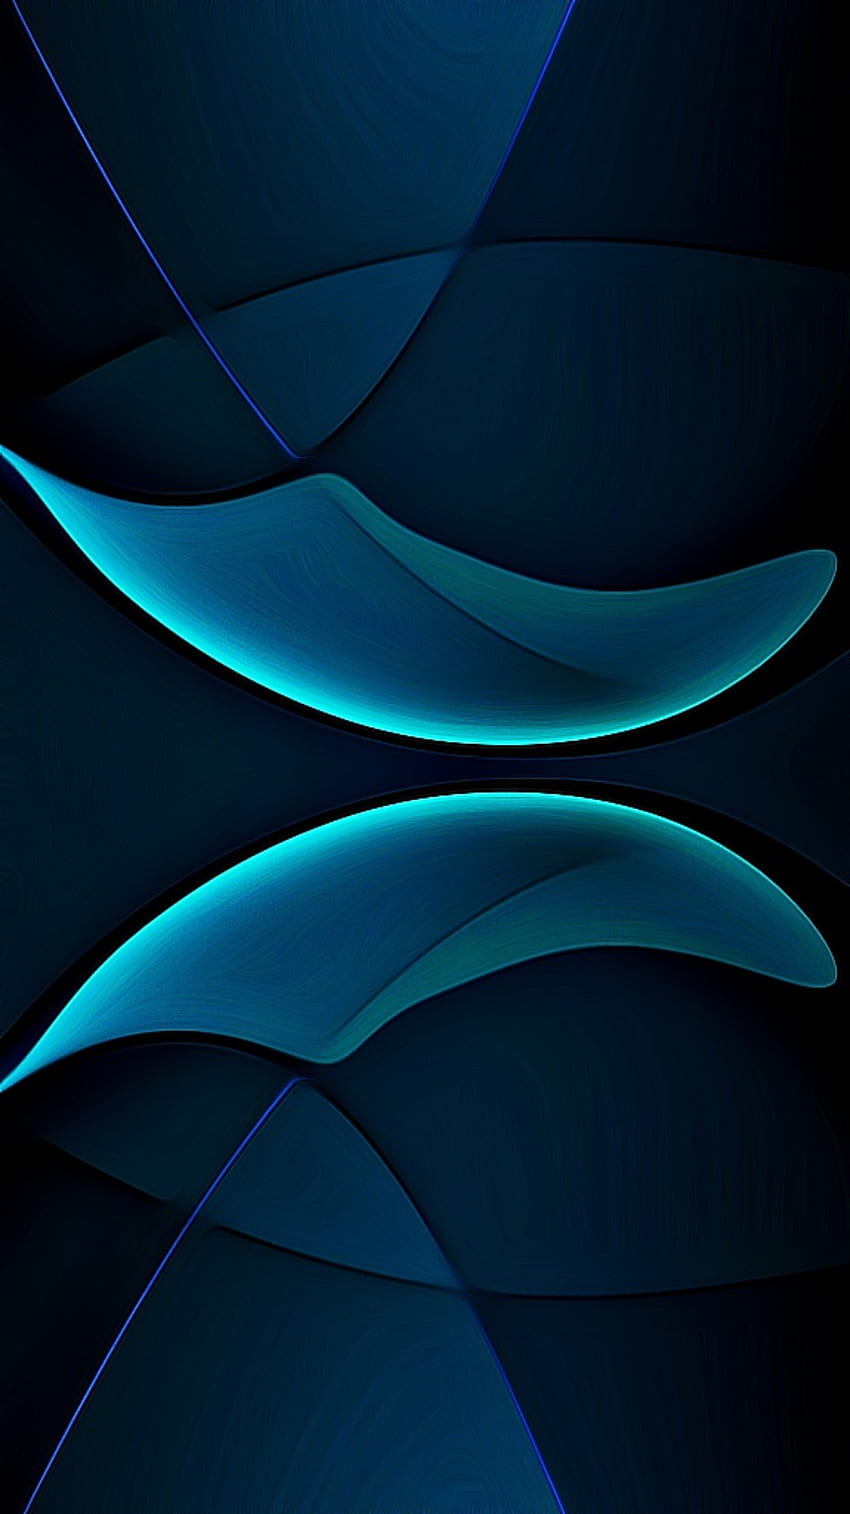 Teal Abstract 4K Wallpapers  HD Wallpapers  ID 30501